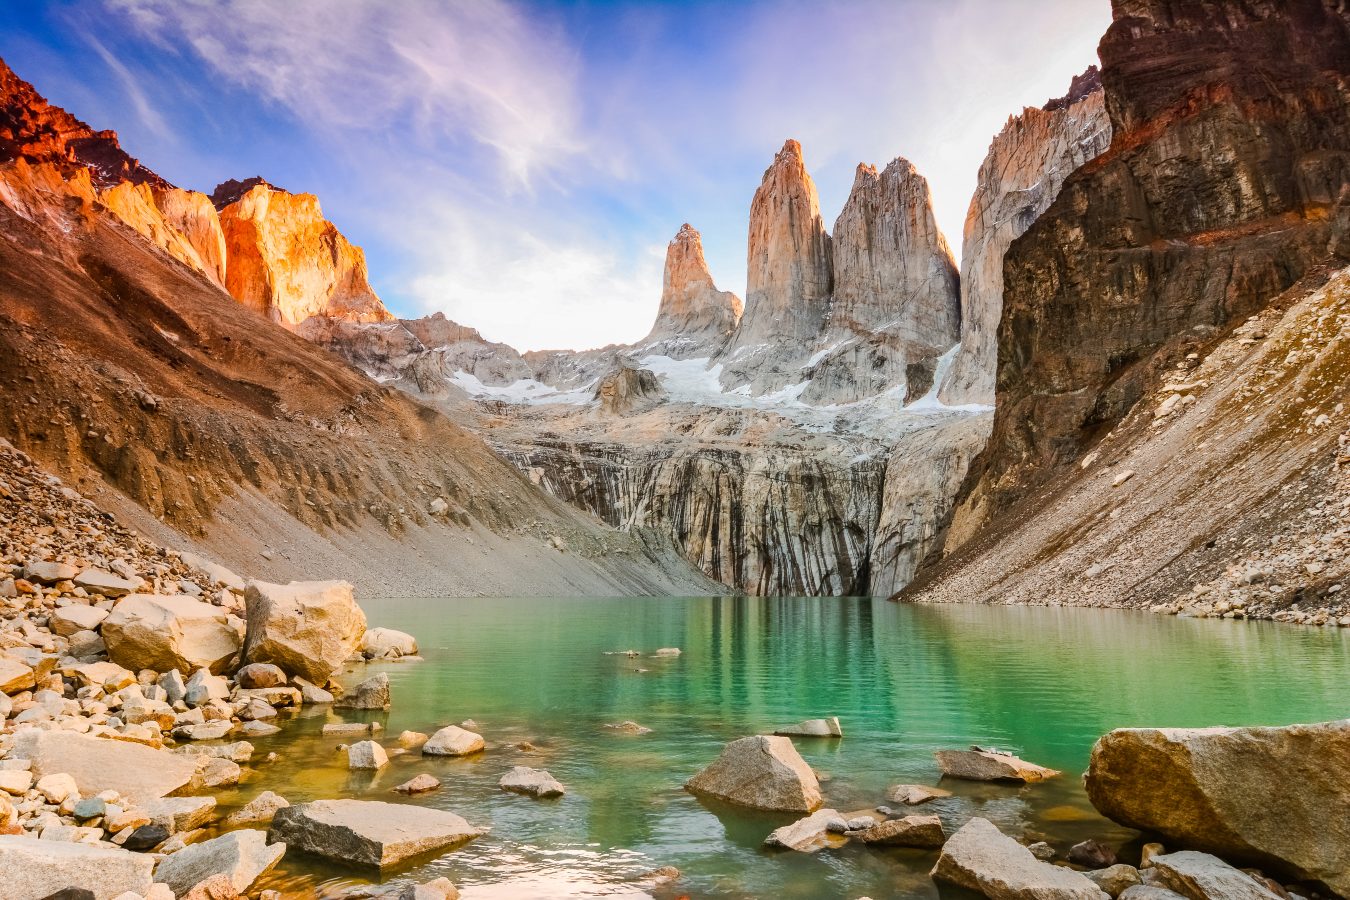 Torres del Paine National Park in Patagonia, Chile, one of the top destinations for 2023